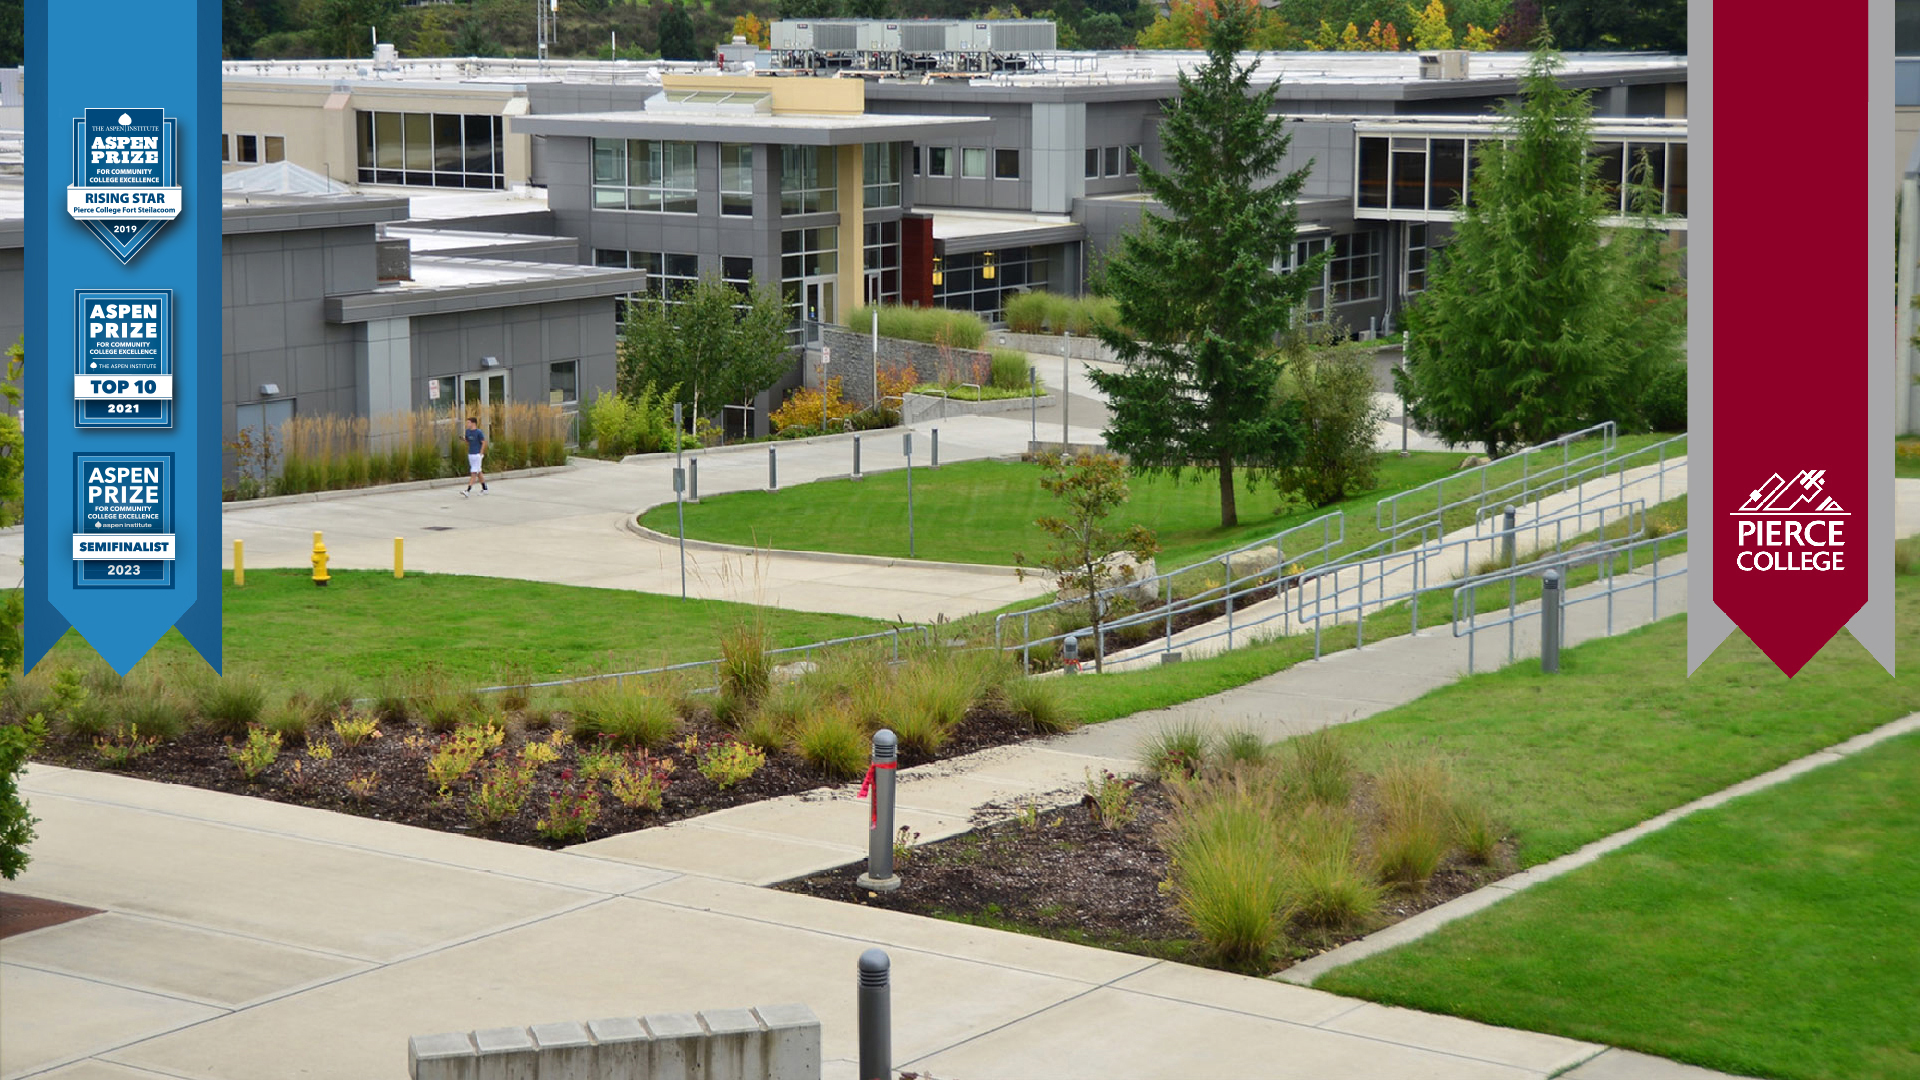 outdoors at fort steilacoom campus with pierce college and aspen institute logos